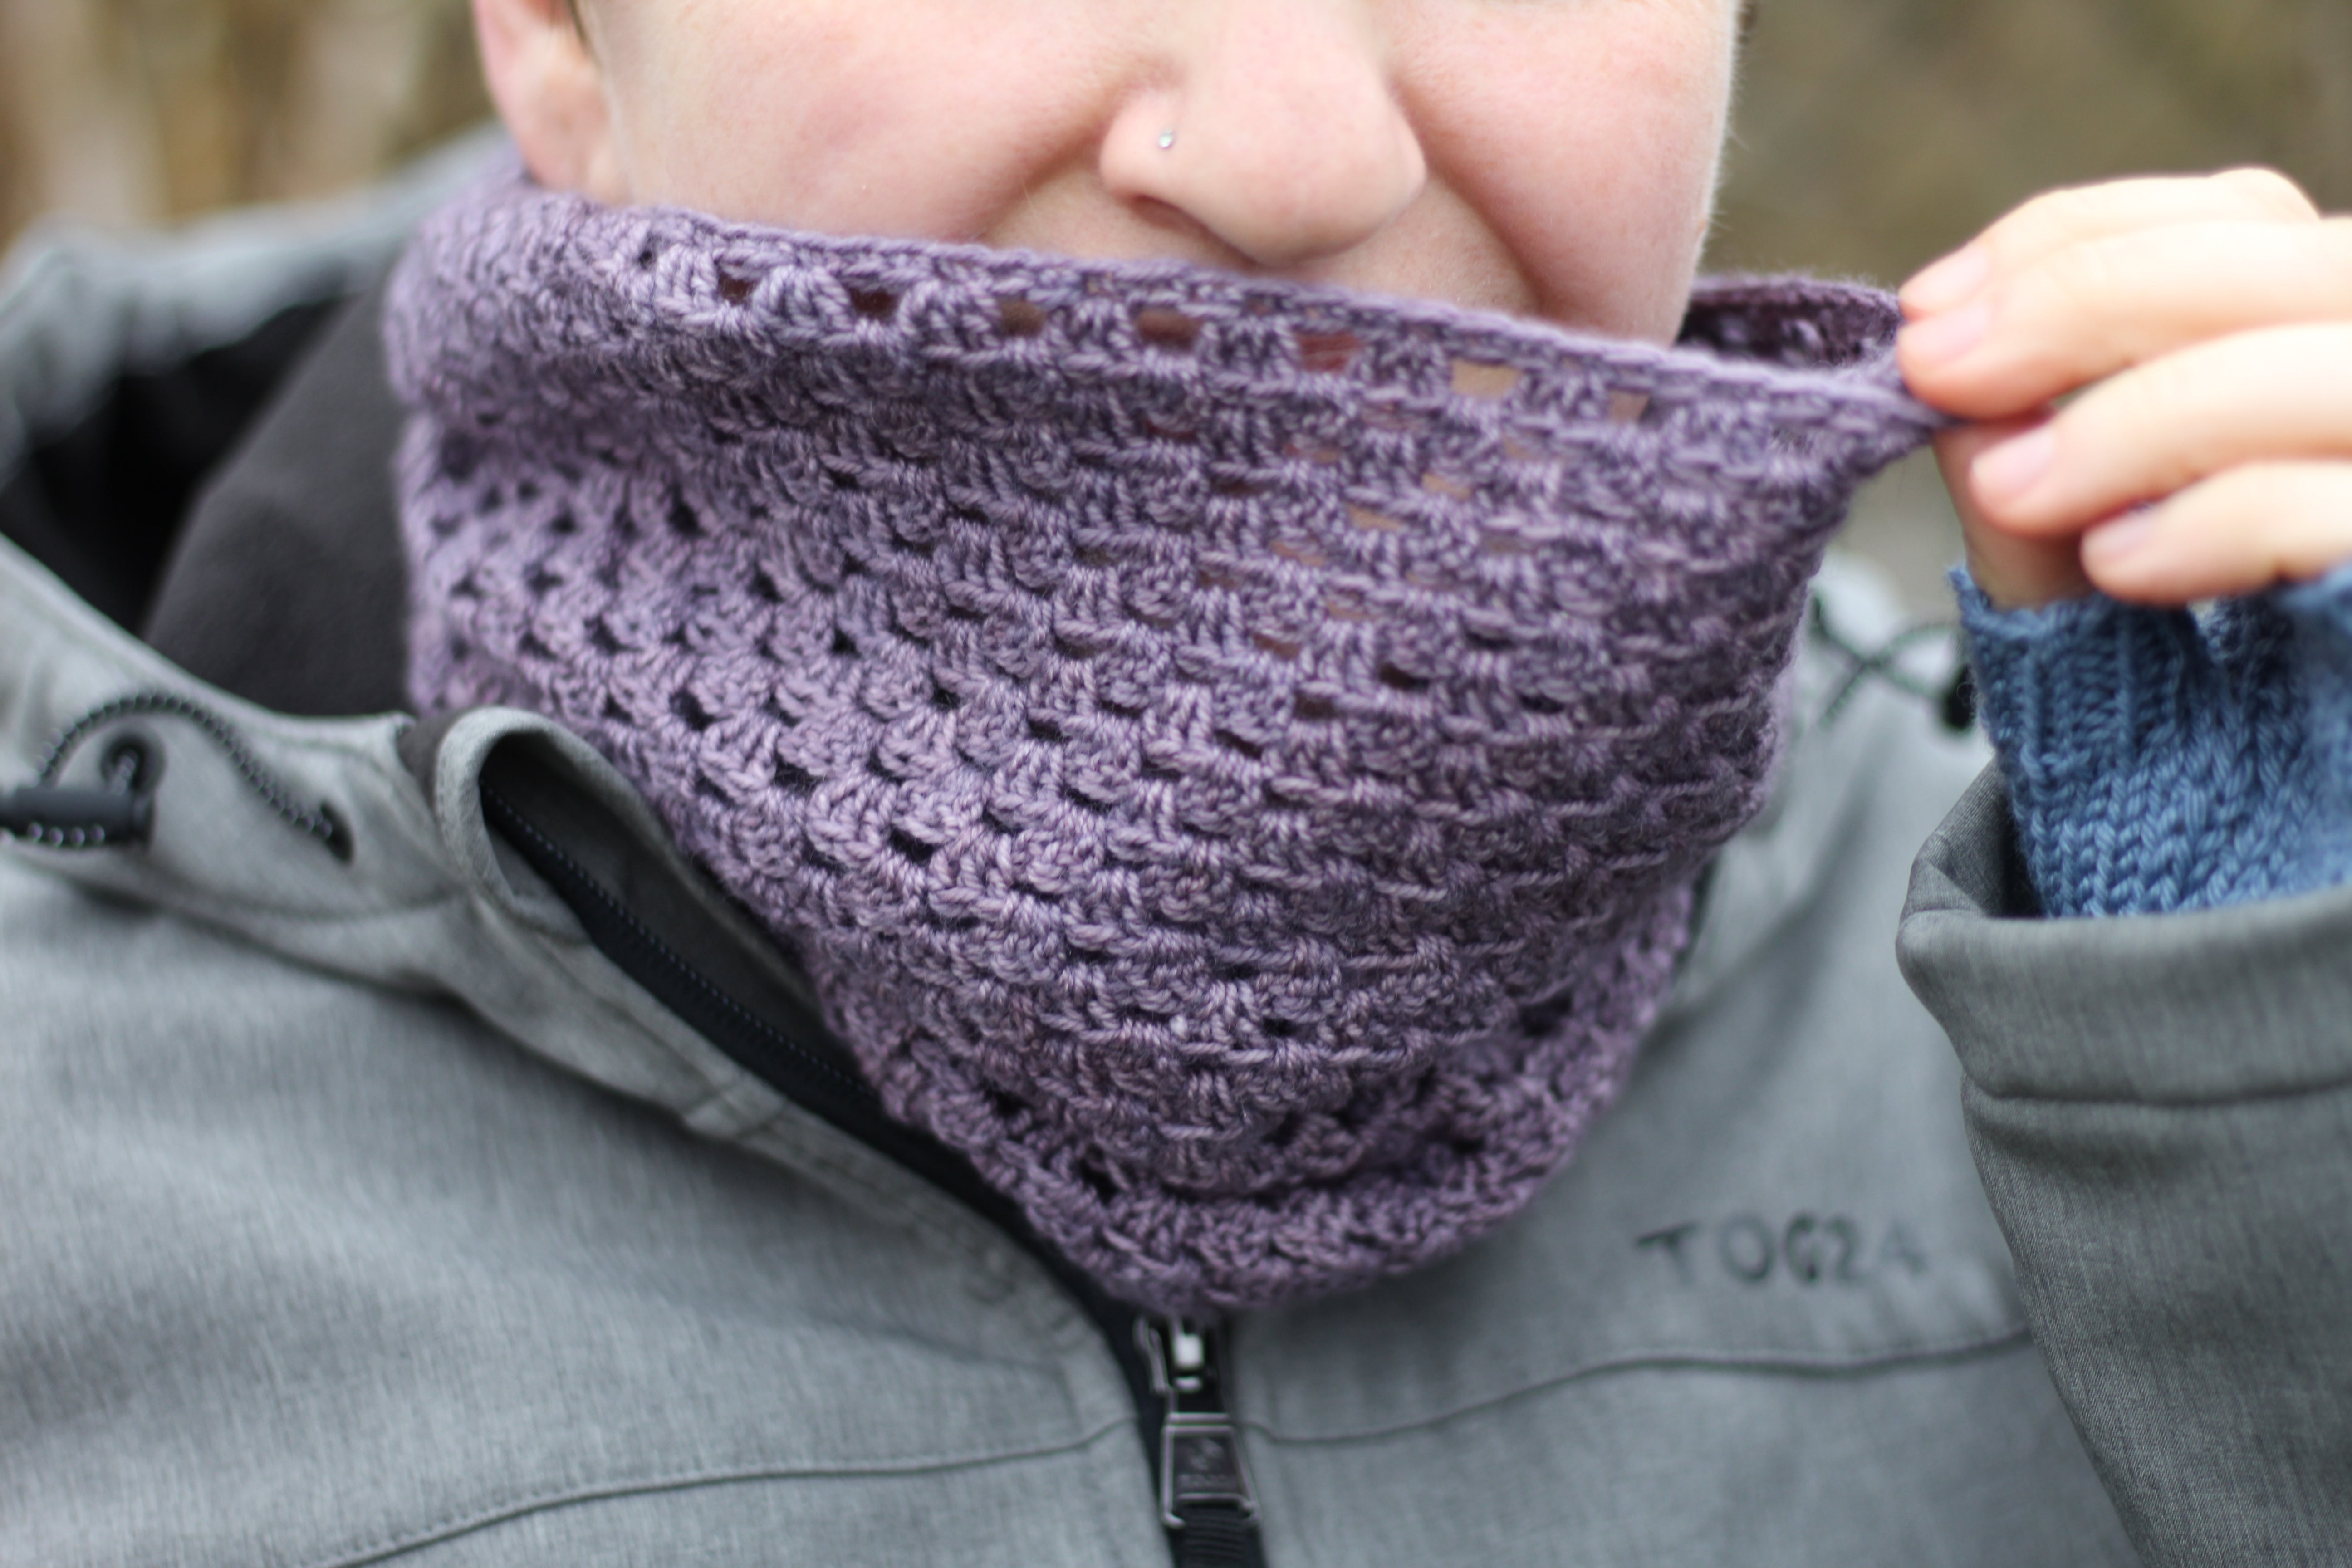 Victoria wearing a purple granny stripe cowl and pulling it up to partially cover her face.